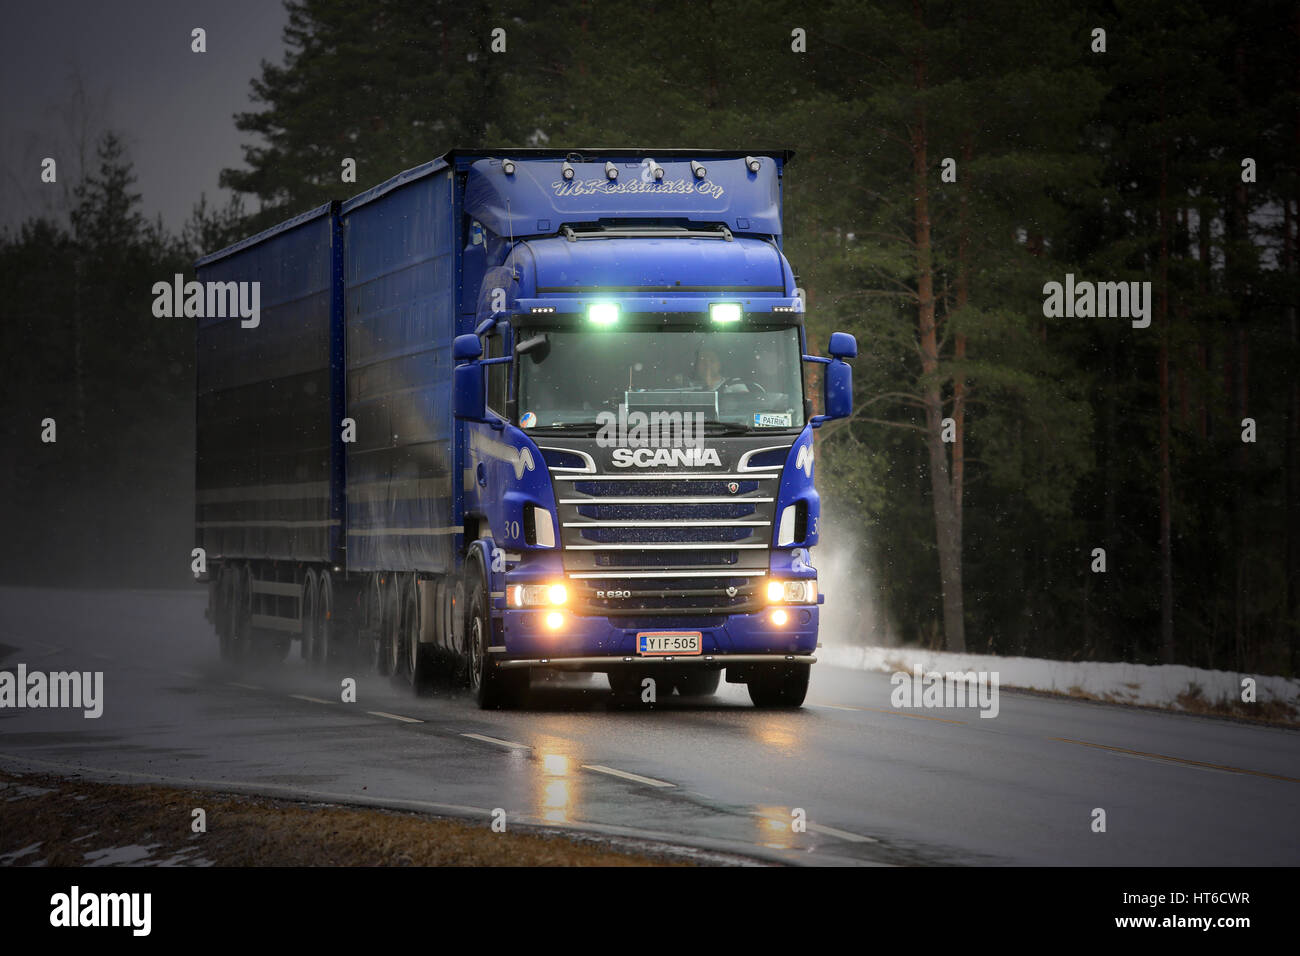 SALO, FINLAND - MARCH 4, 2017: Blue Scania R620 combination vehicle of M. Keskimaki transports goods along wet road in snowfall, high beams flashed br Stock Photo